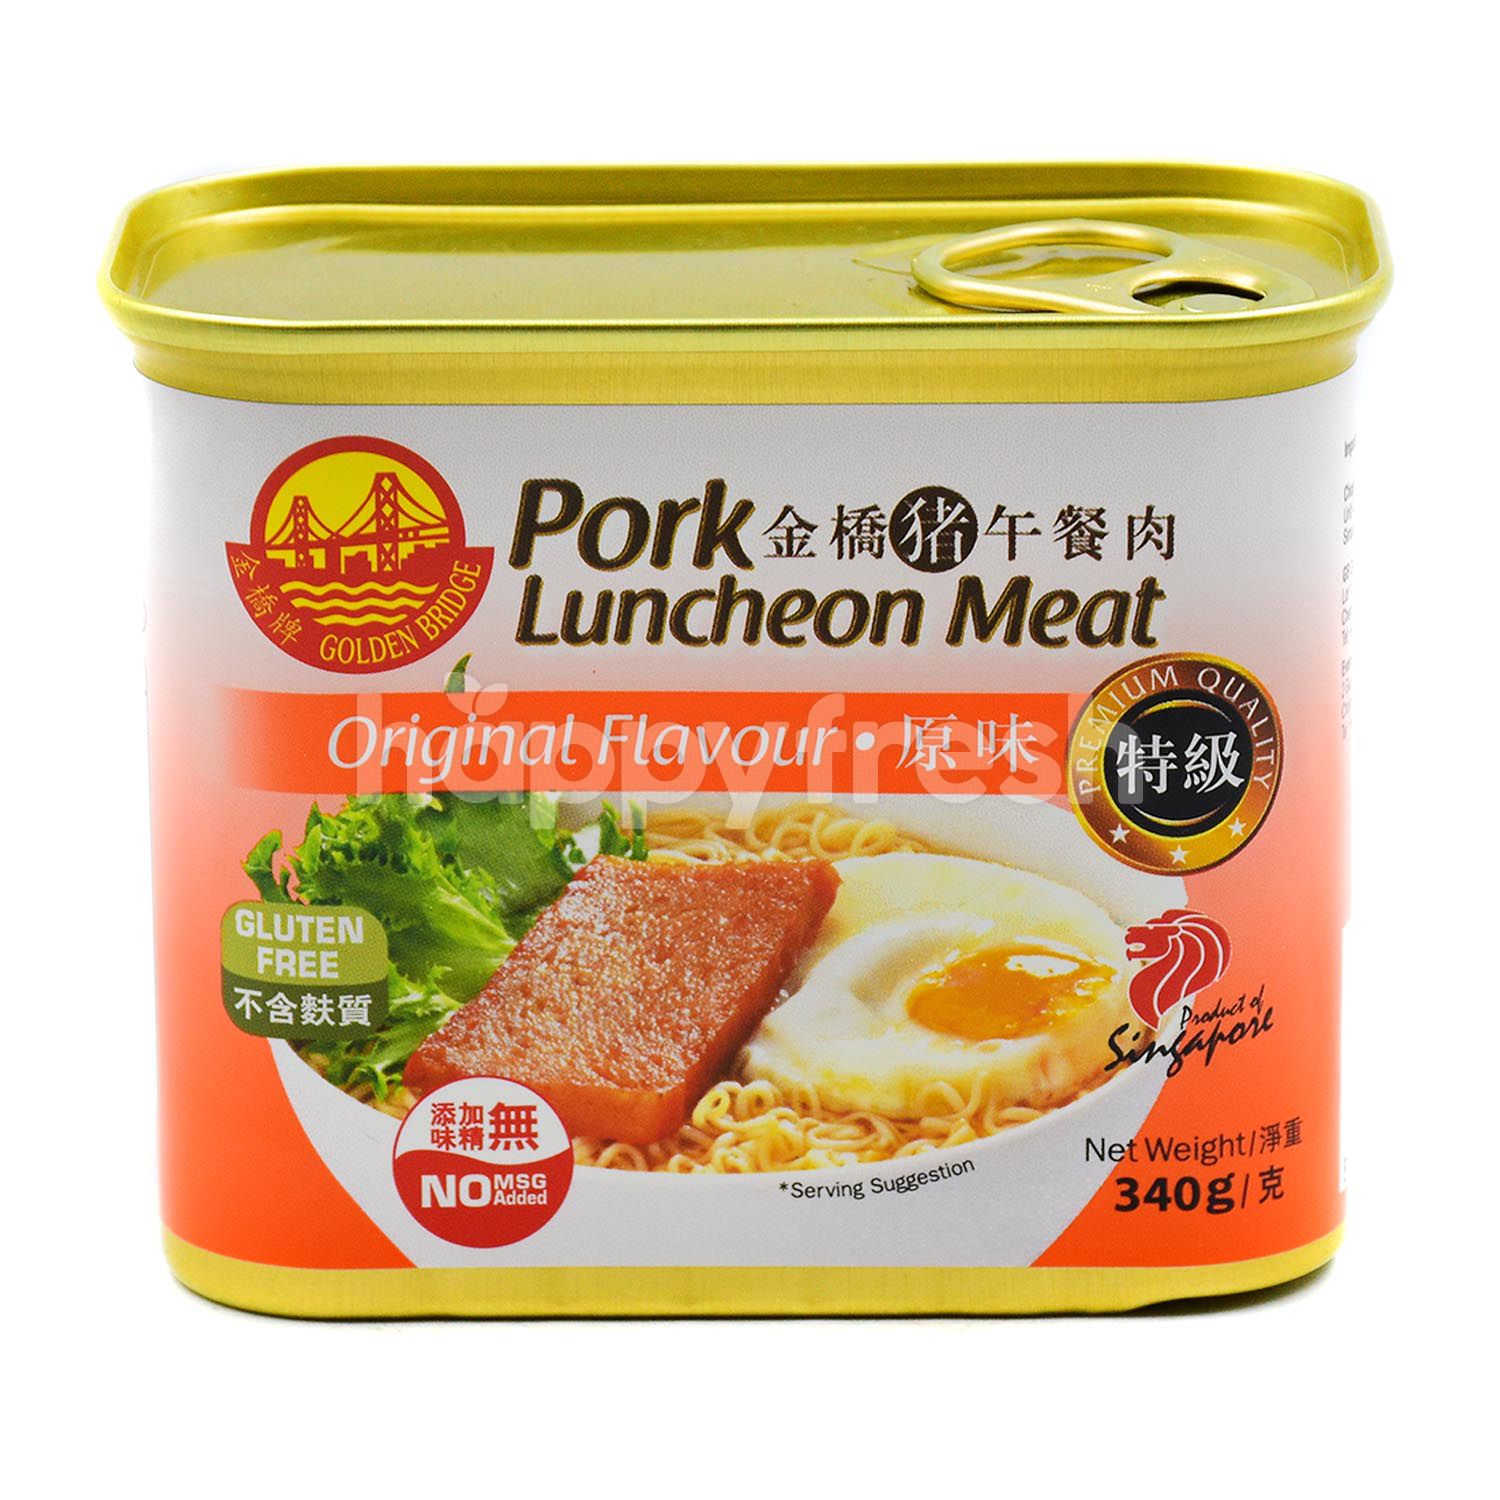 Made for meat. Luncheon meat консервы. Luncheon meat китайский. Luncheon meat консервы ingredients. Chicken Luncheon meat.